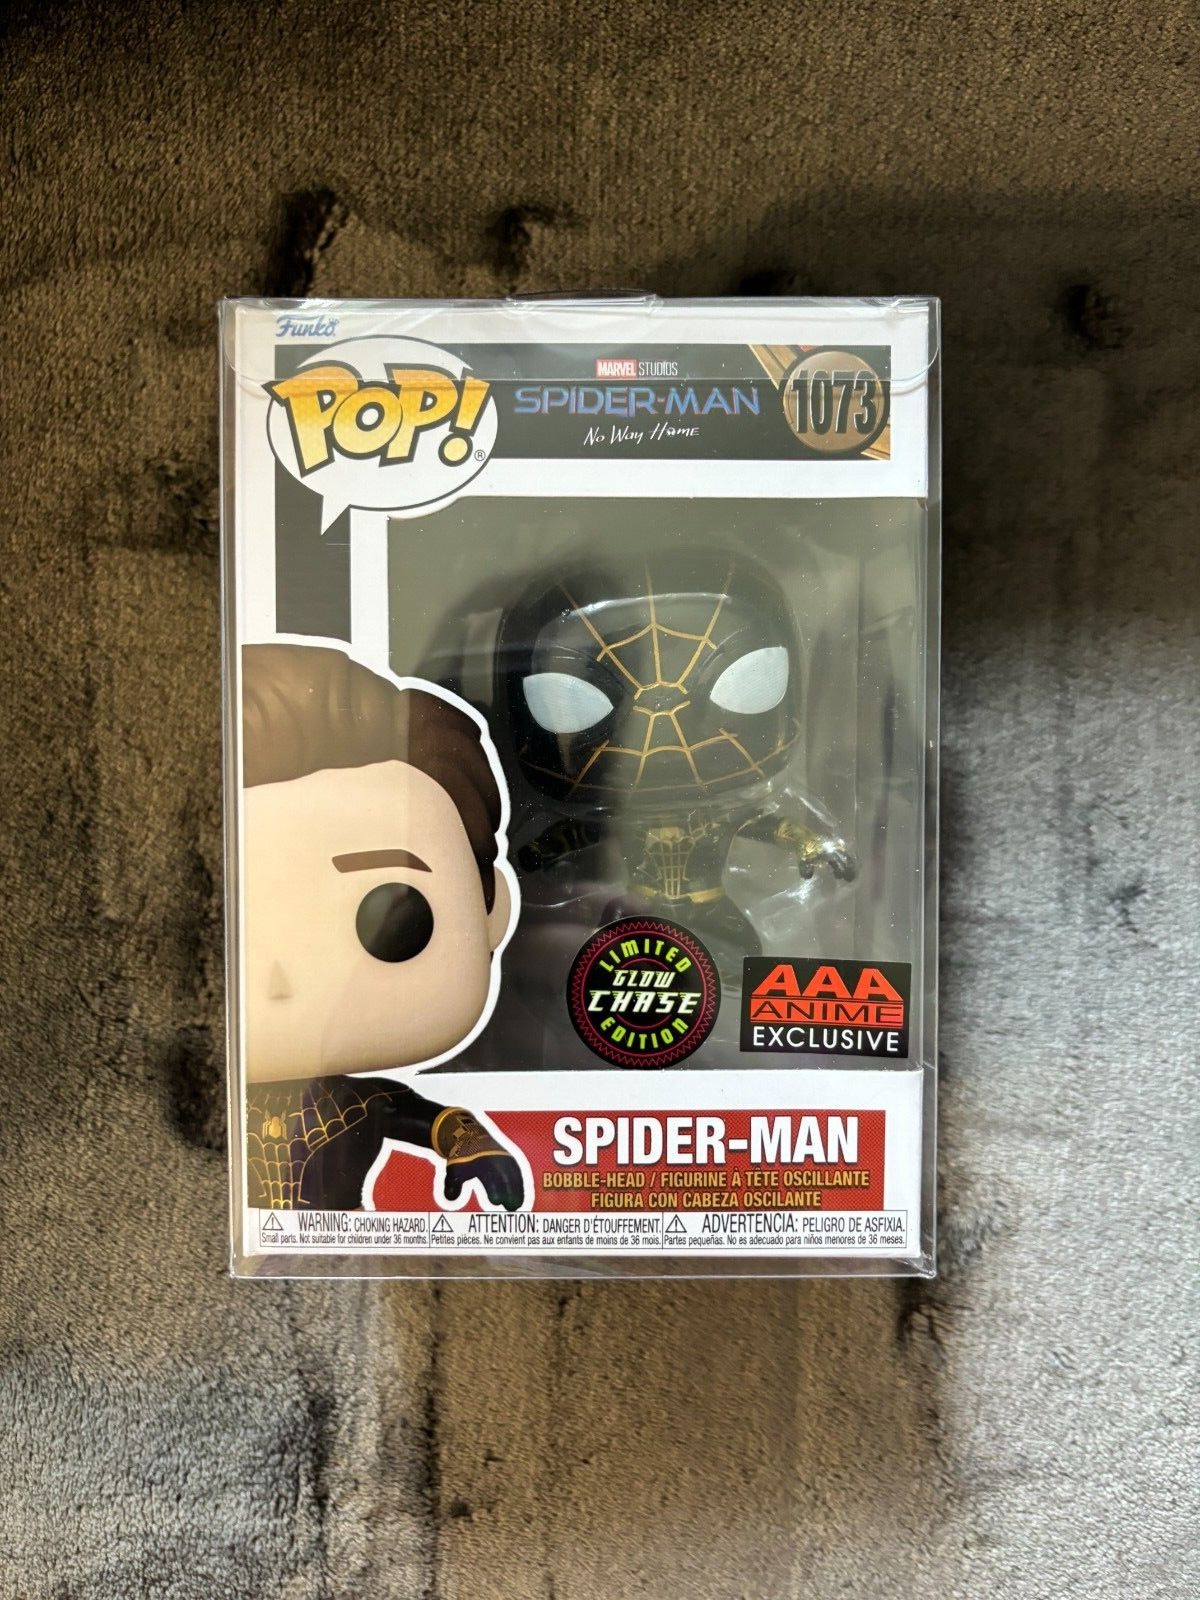 Spider-Man AAA Anime Exclusive CHASE Funko Pop w/ Protector Marvel